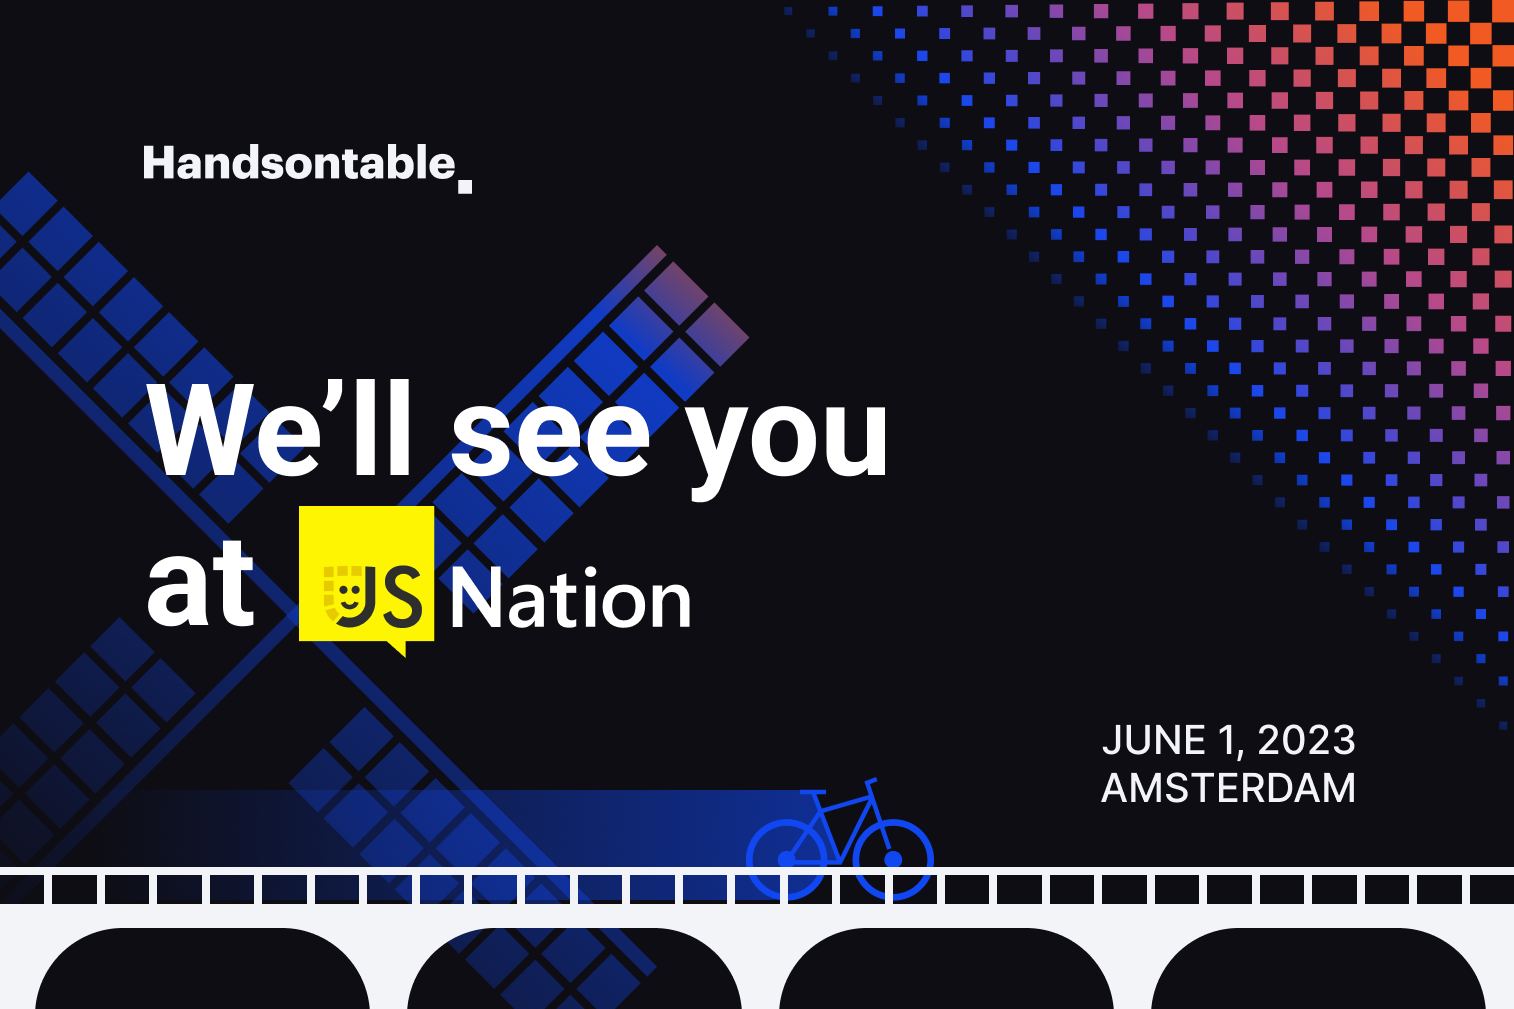 Handsontable is going to JSNation!